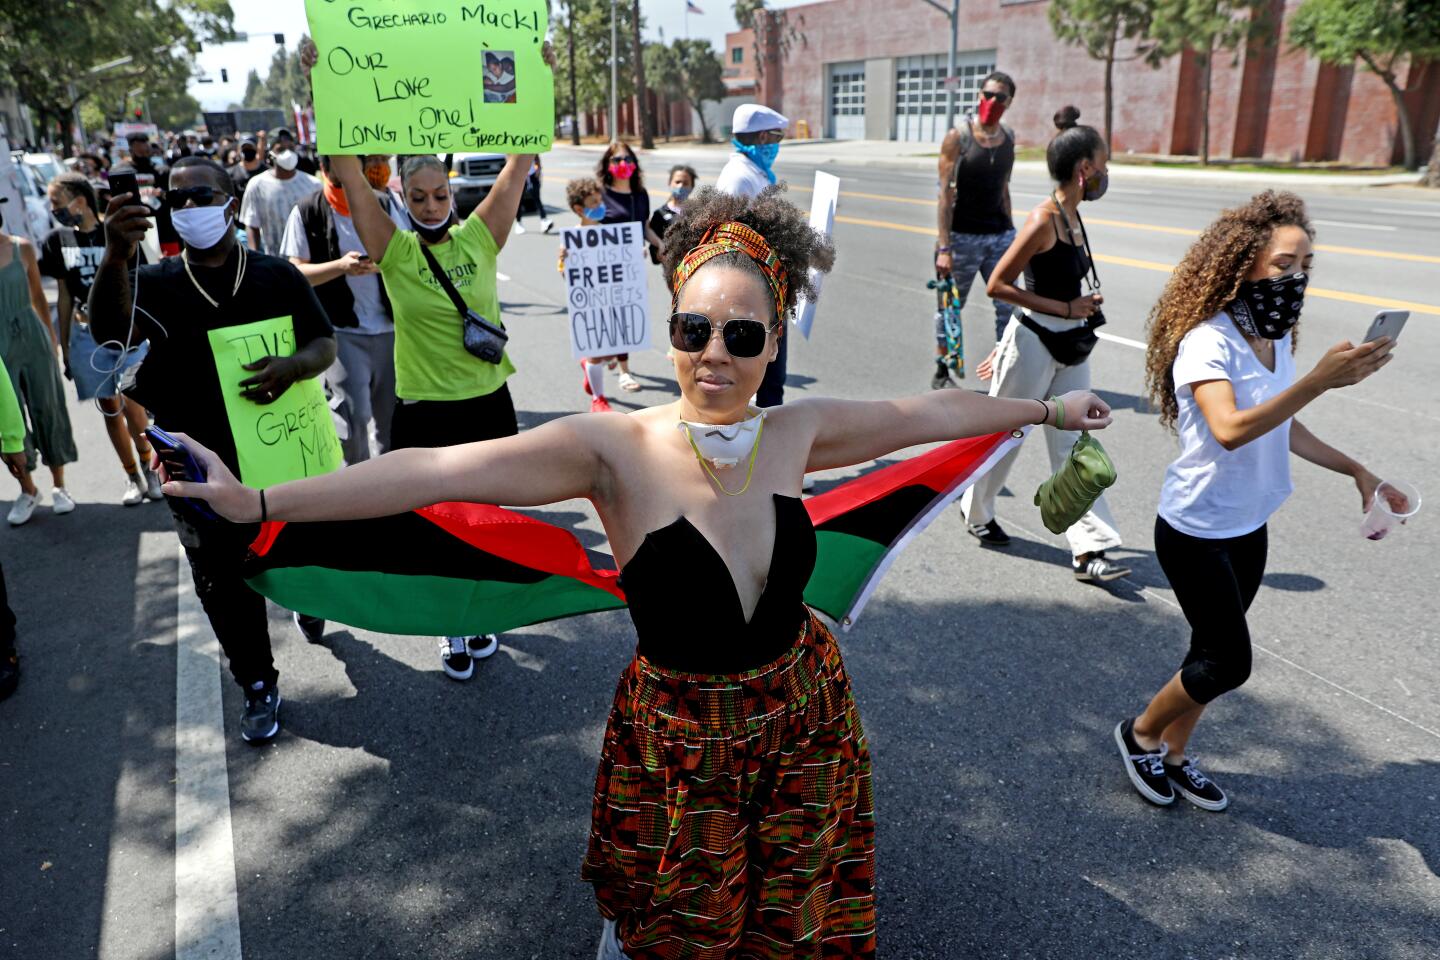 Samantha Husbands marches with the Juneteenth "Black Lives Liberating the Black Community" Caravan/March.